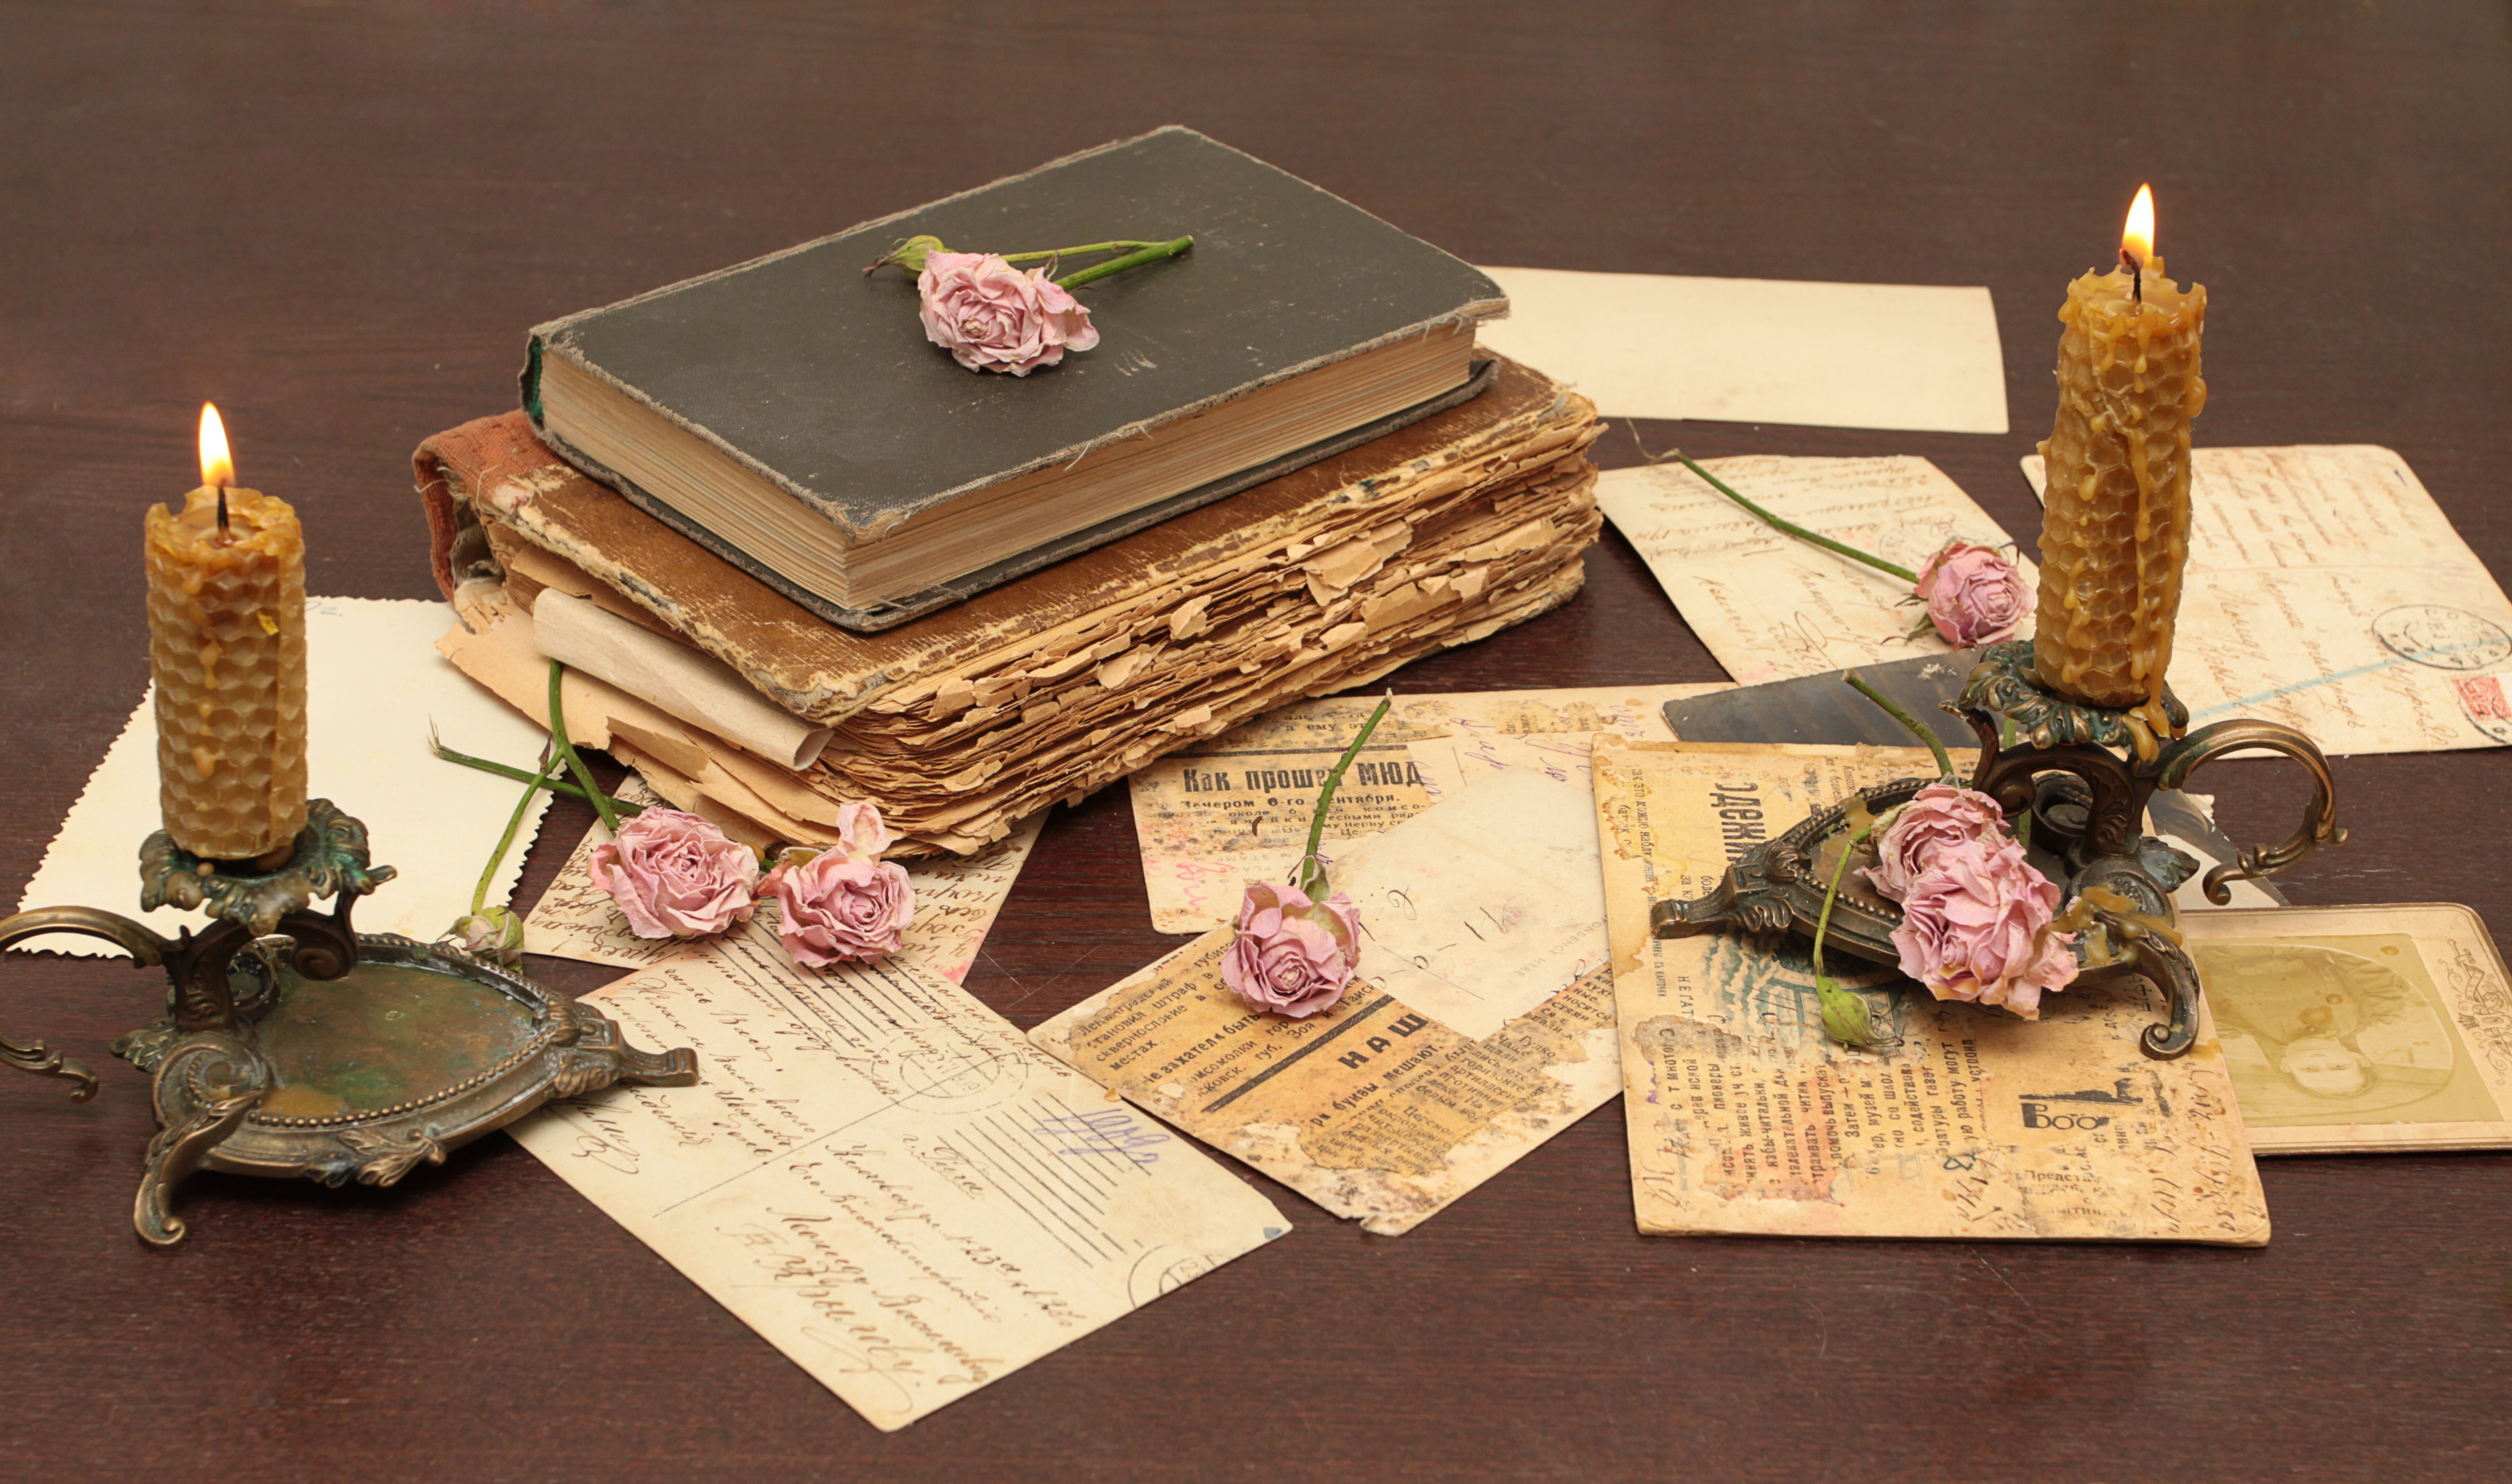 miscellaneous, old, vintage, miscellanea, books, flowers, roses, candles, postcards, table, paper, letters, candlesticks download HD wallpaper